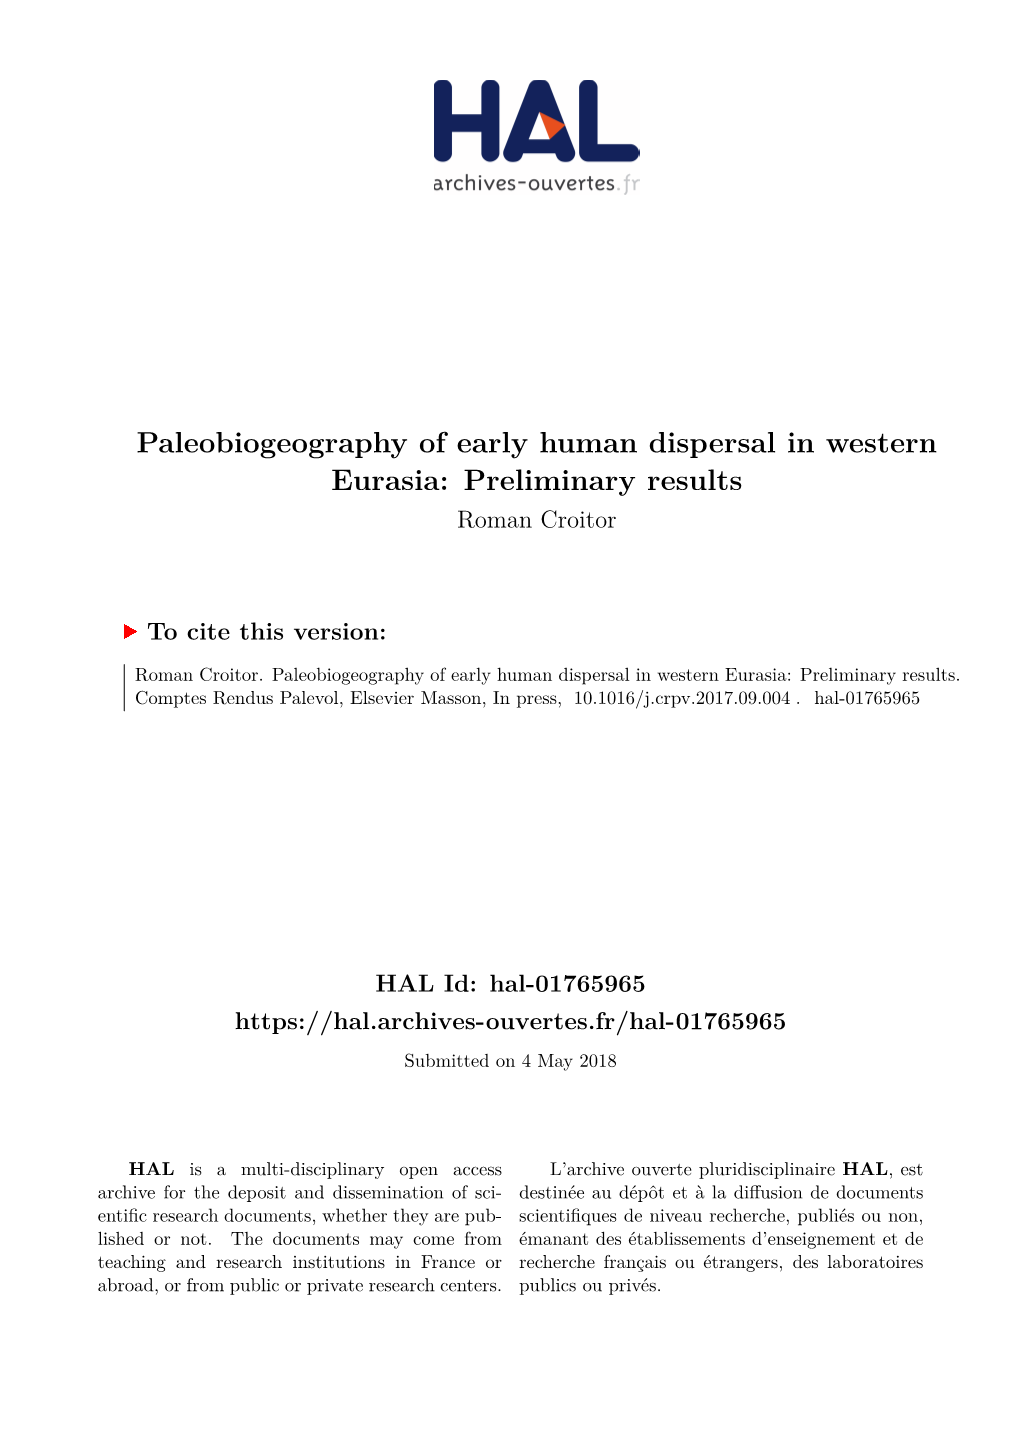 Paleobiogeography of Early Human Dispersal in Western Eurasia: Preliminary Results Roman Croitor